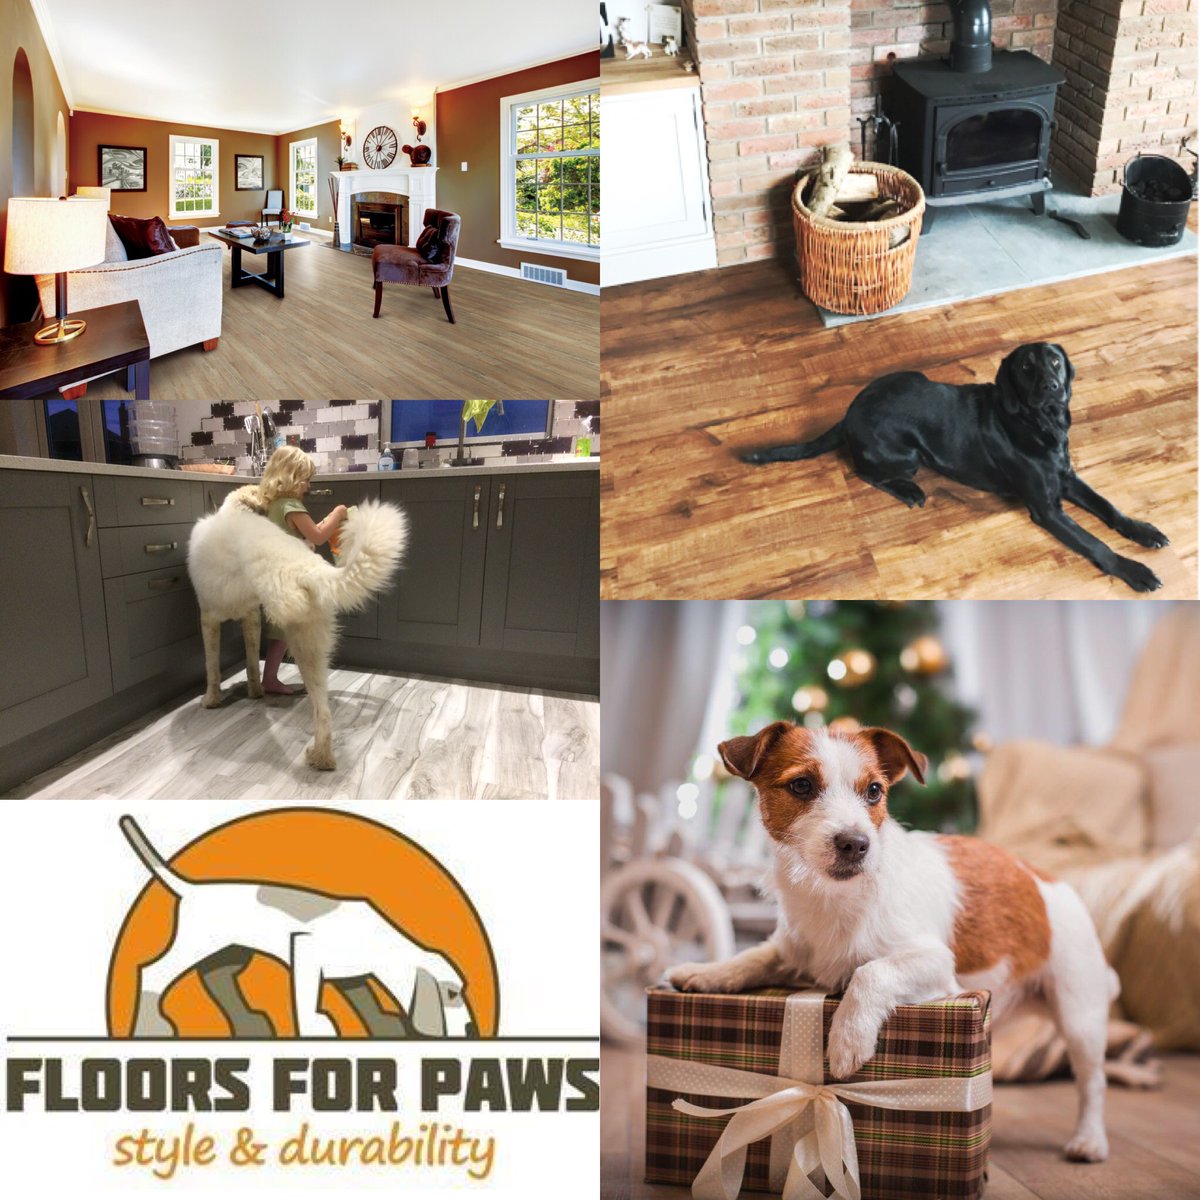 We're delighted to include @floorsforpaws in our pack Floors For Paws provide hard-wearing, realistic wood effect flooring. Scratch resistant, anti-slip & stain resistant too, it's perfect for paws big & small! dotty4paws.co.uk/businesses/lis… … #UKgiftHour #HandmadeHour